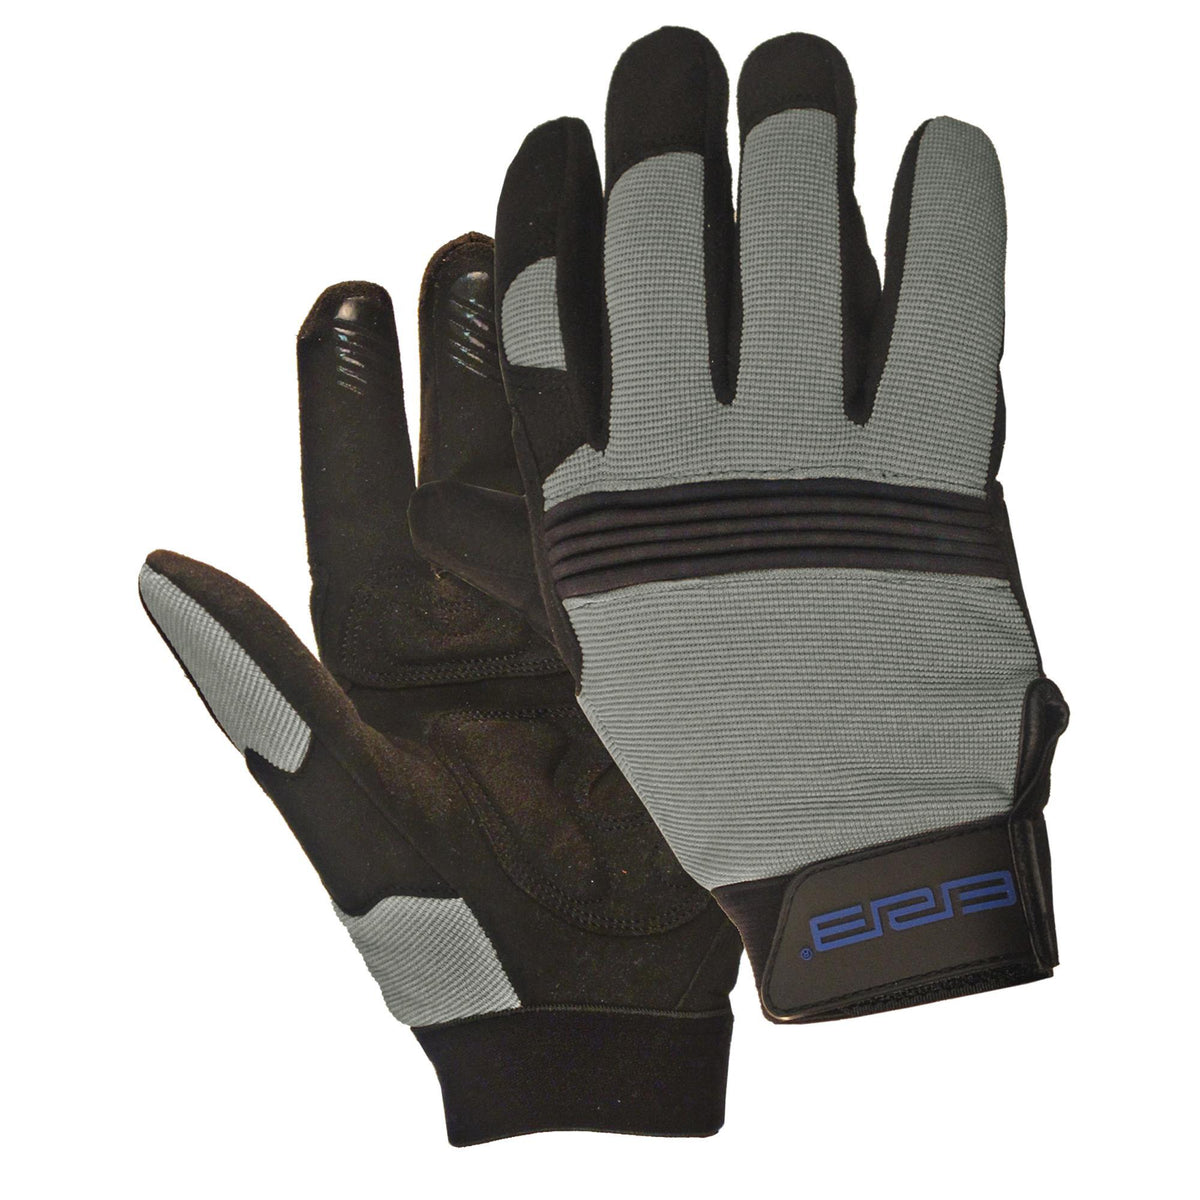 428-612 (M300) Mechanics Glove with Knuckle Guard 1PAIR